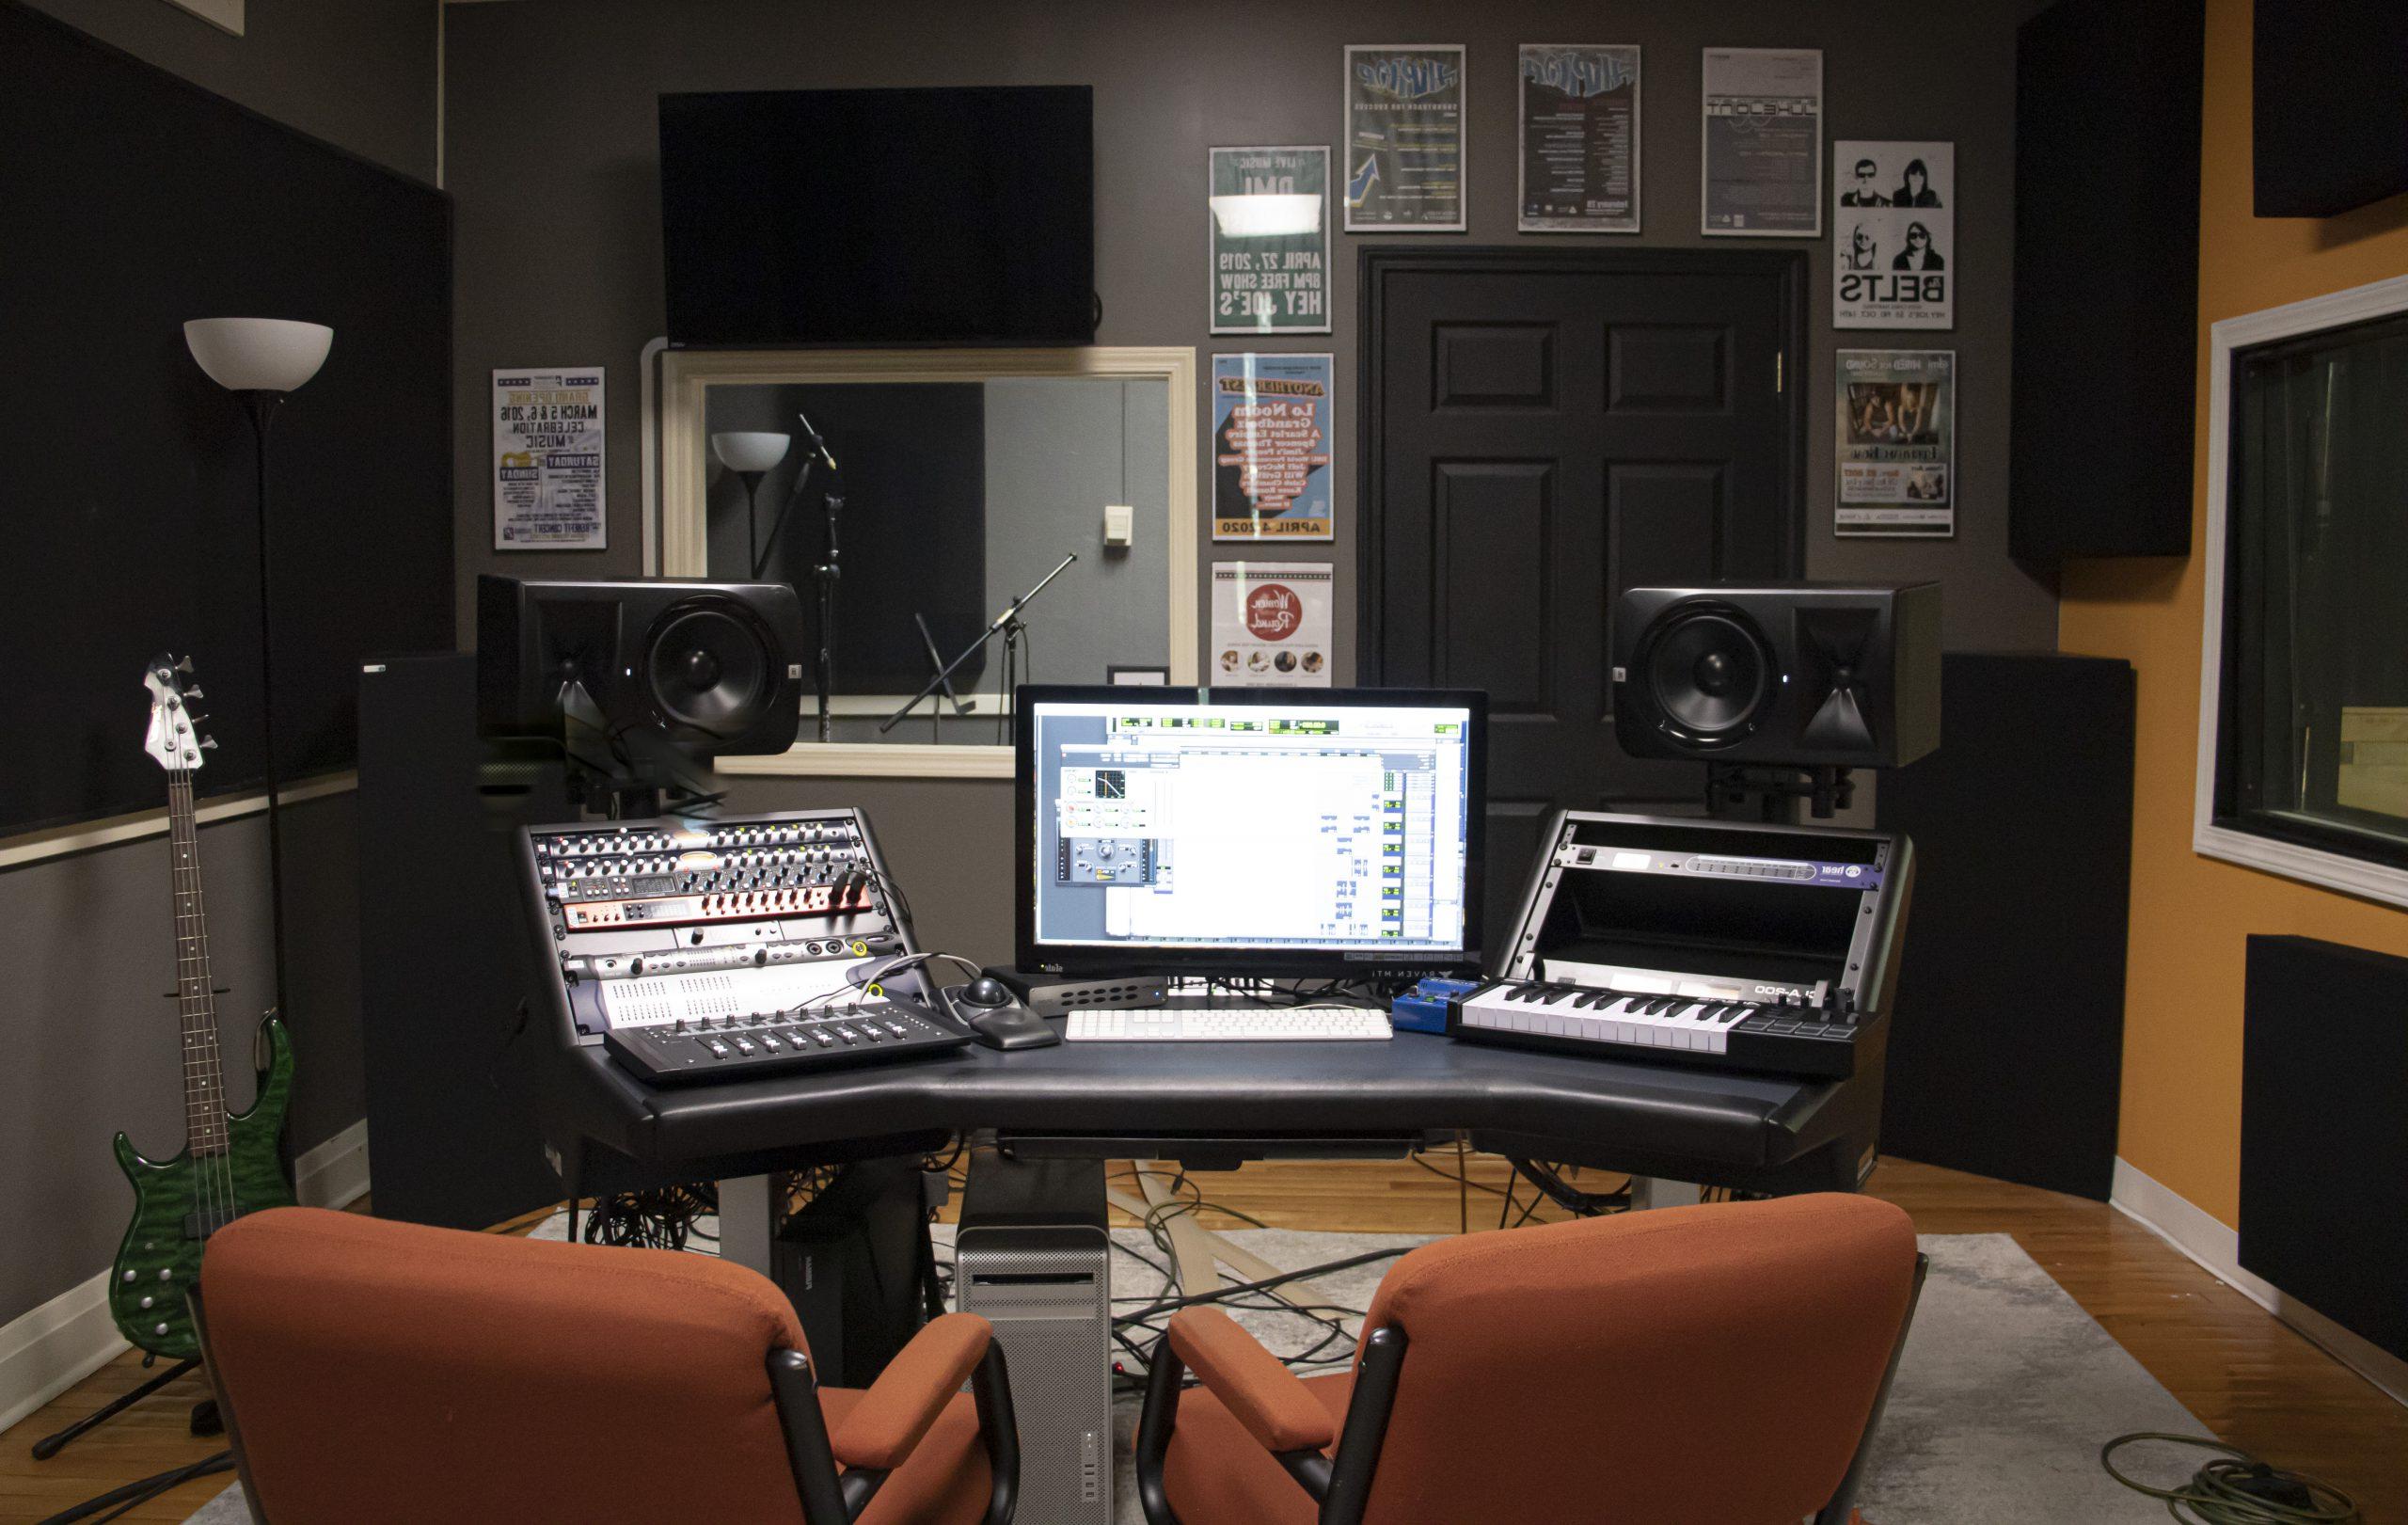 Small recording studio with recording equipment on each site of the computer screen.